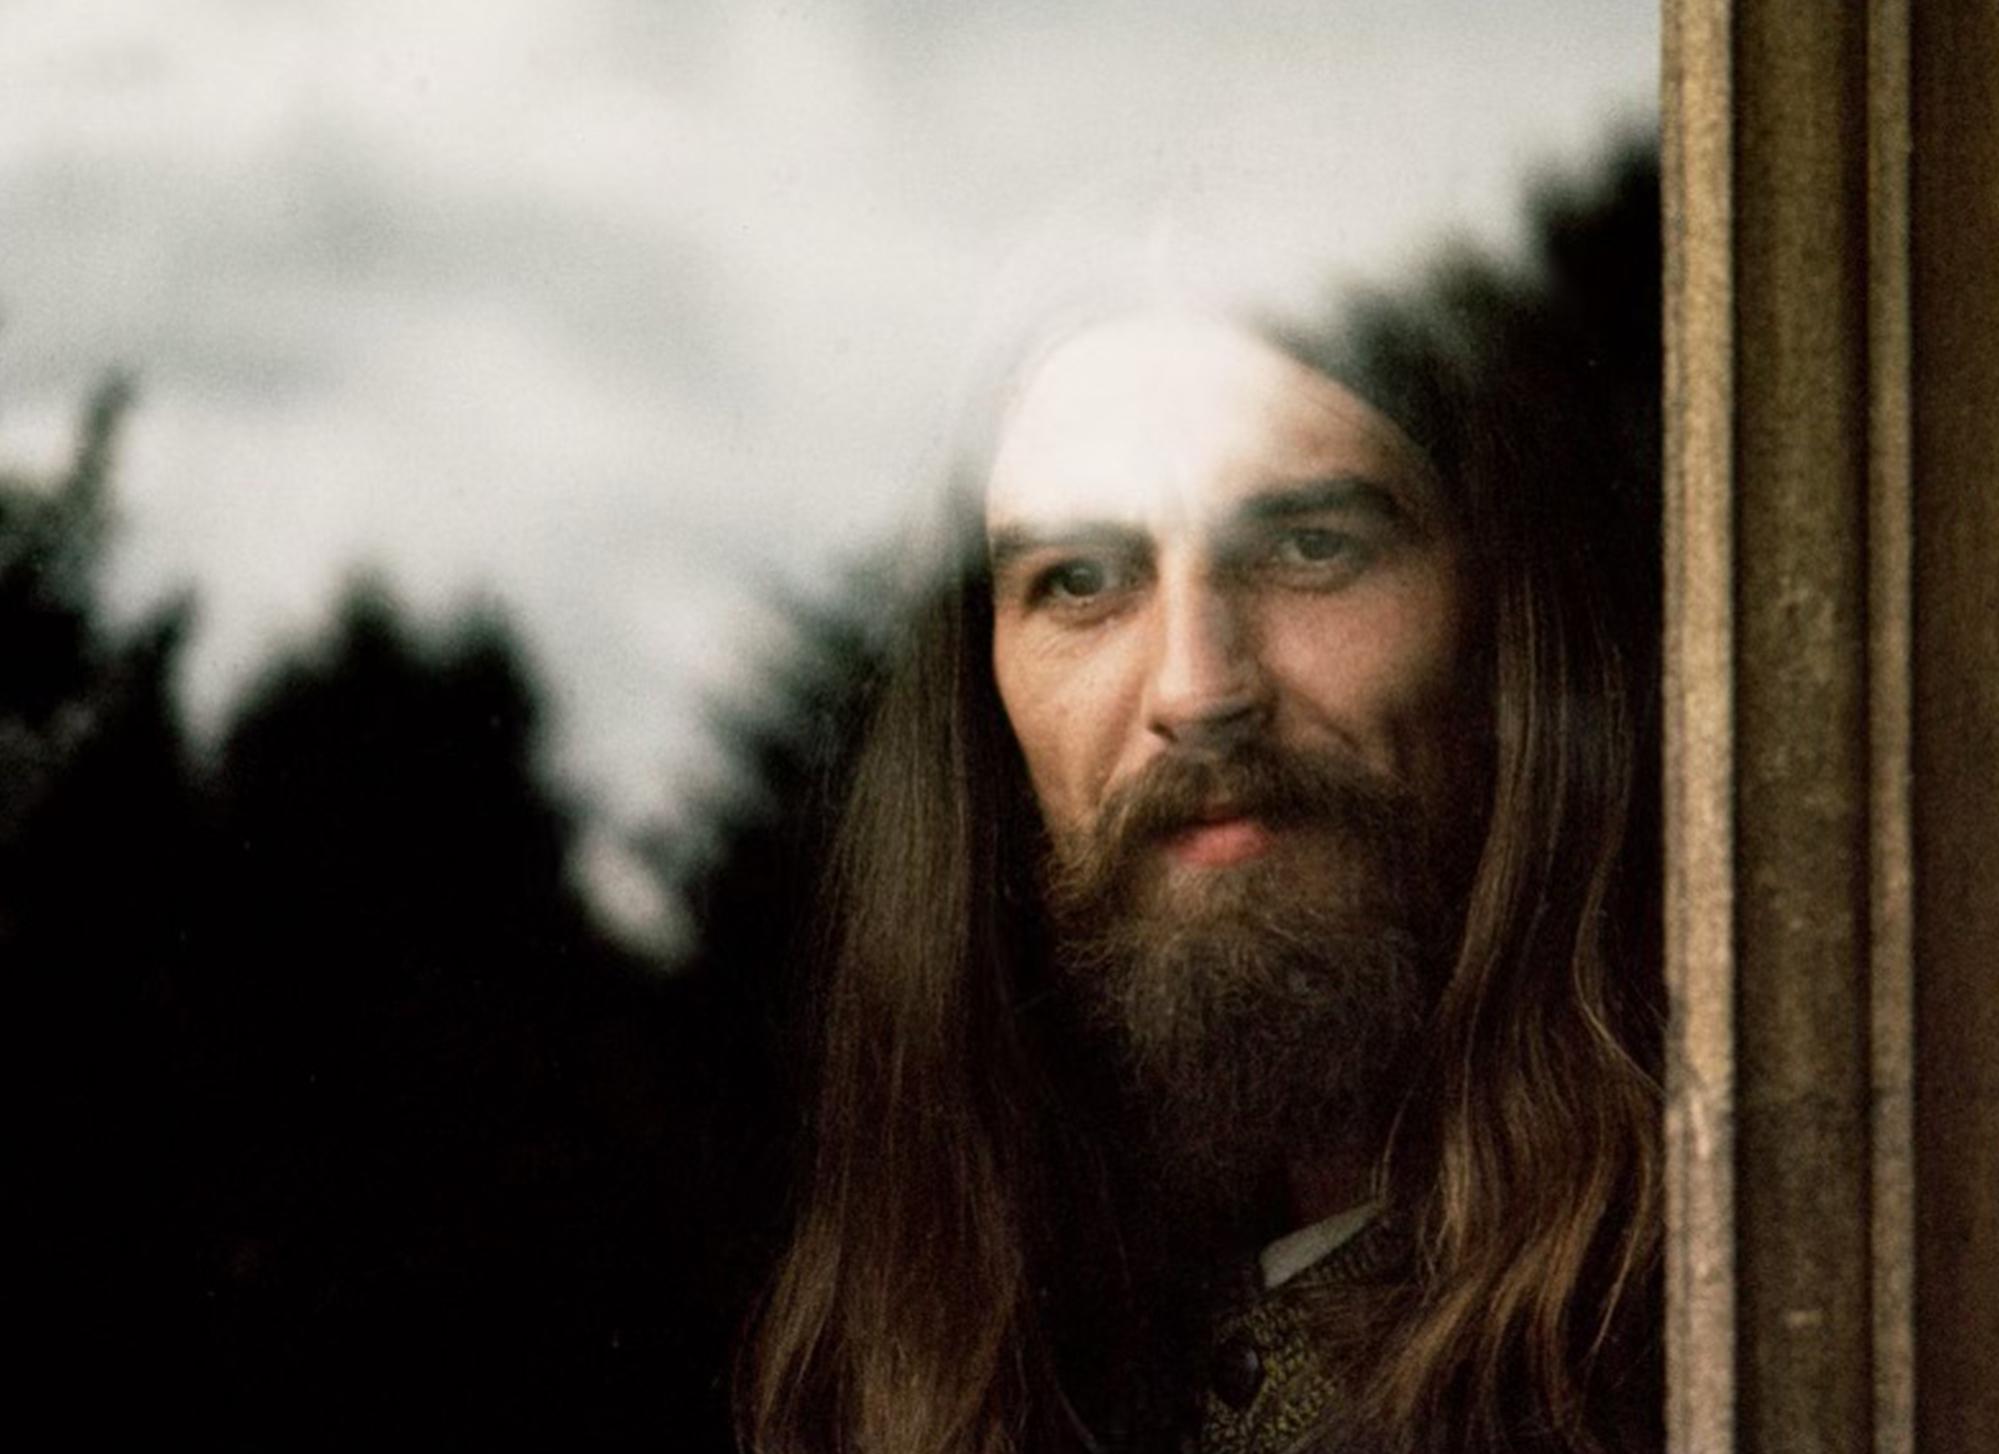 Barry Feinstein Color Photograph - NEW - never before offered - George Harrison from "All Things Must Pass"